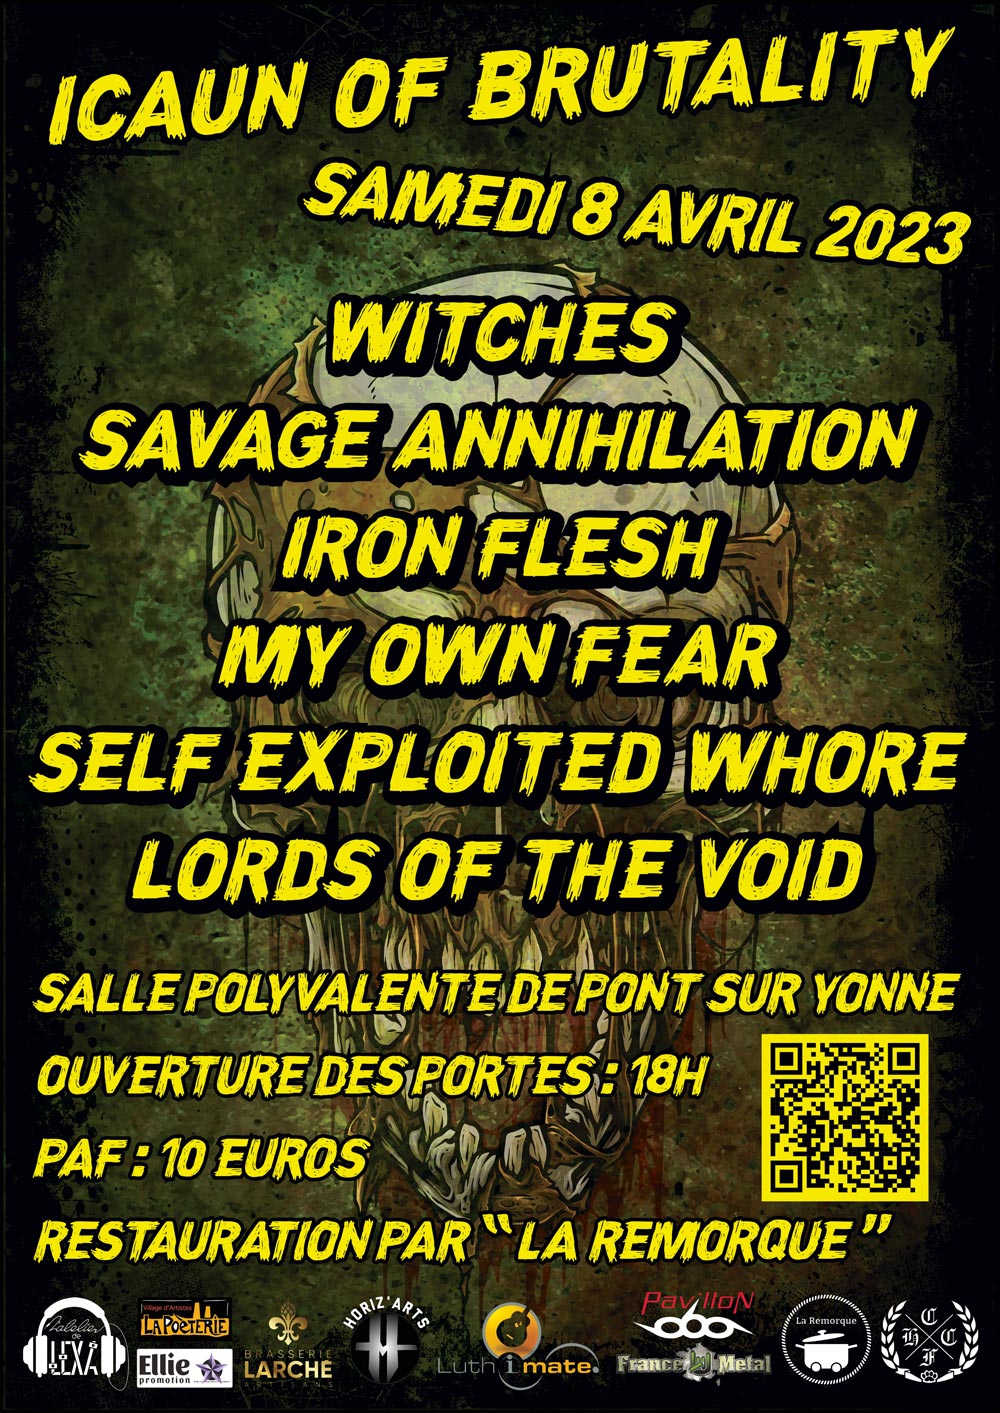 Witches flyer Witches + Savage Annihilation + Iron Flesh + My Own Fear + Self Exploited Whore + Lords of the Void @ Icaun of brutality Salle Polyvalente Pont-sur-Yonne, 89